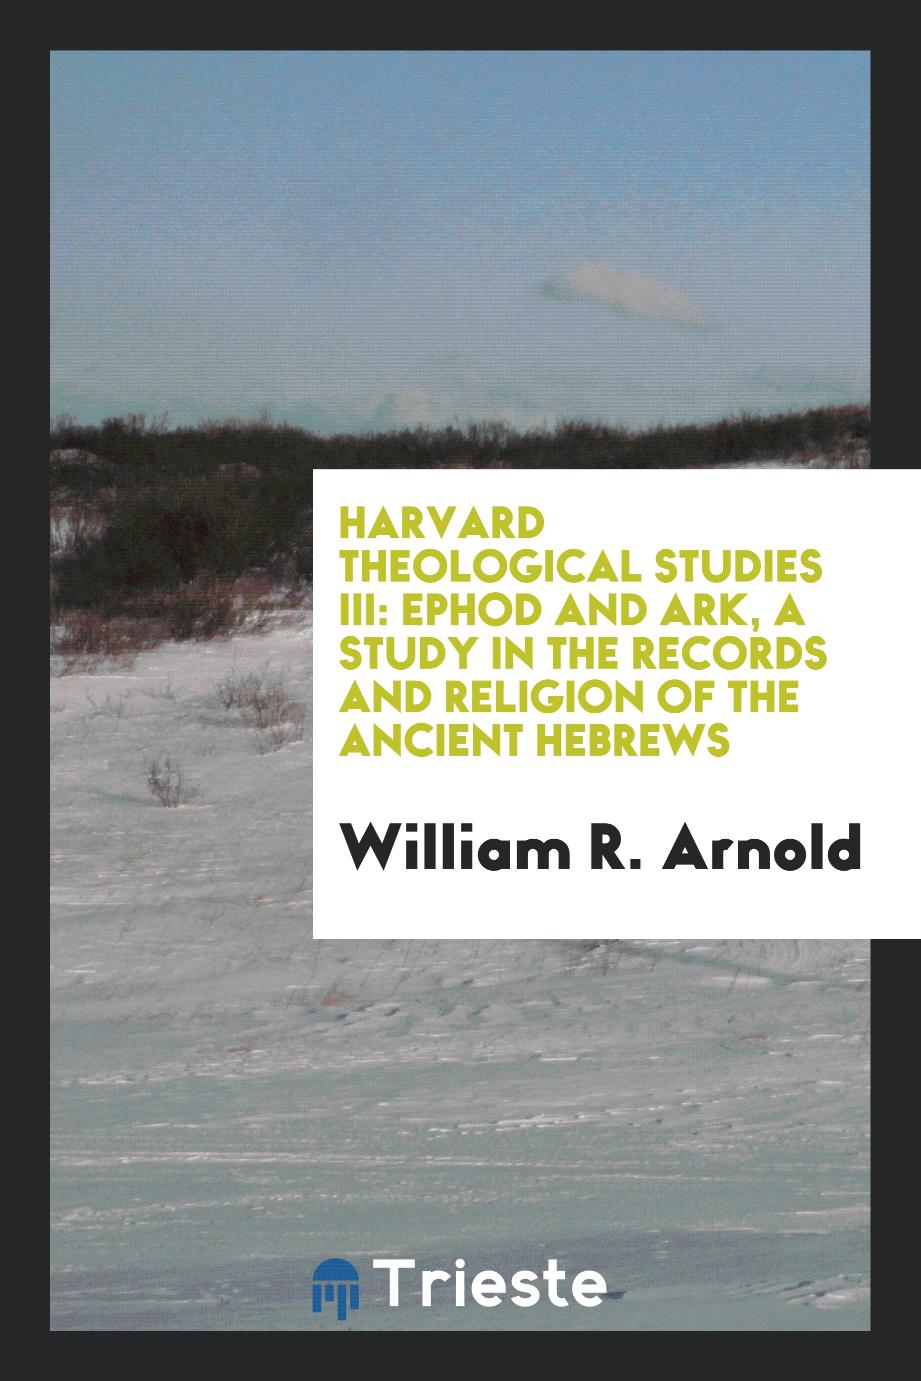 Harvard Theological Studies III: Ephod and Ark, a Study in the Records and Religion of the Ancient Hebrews